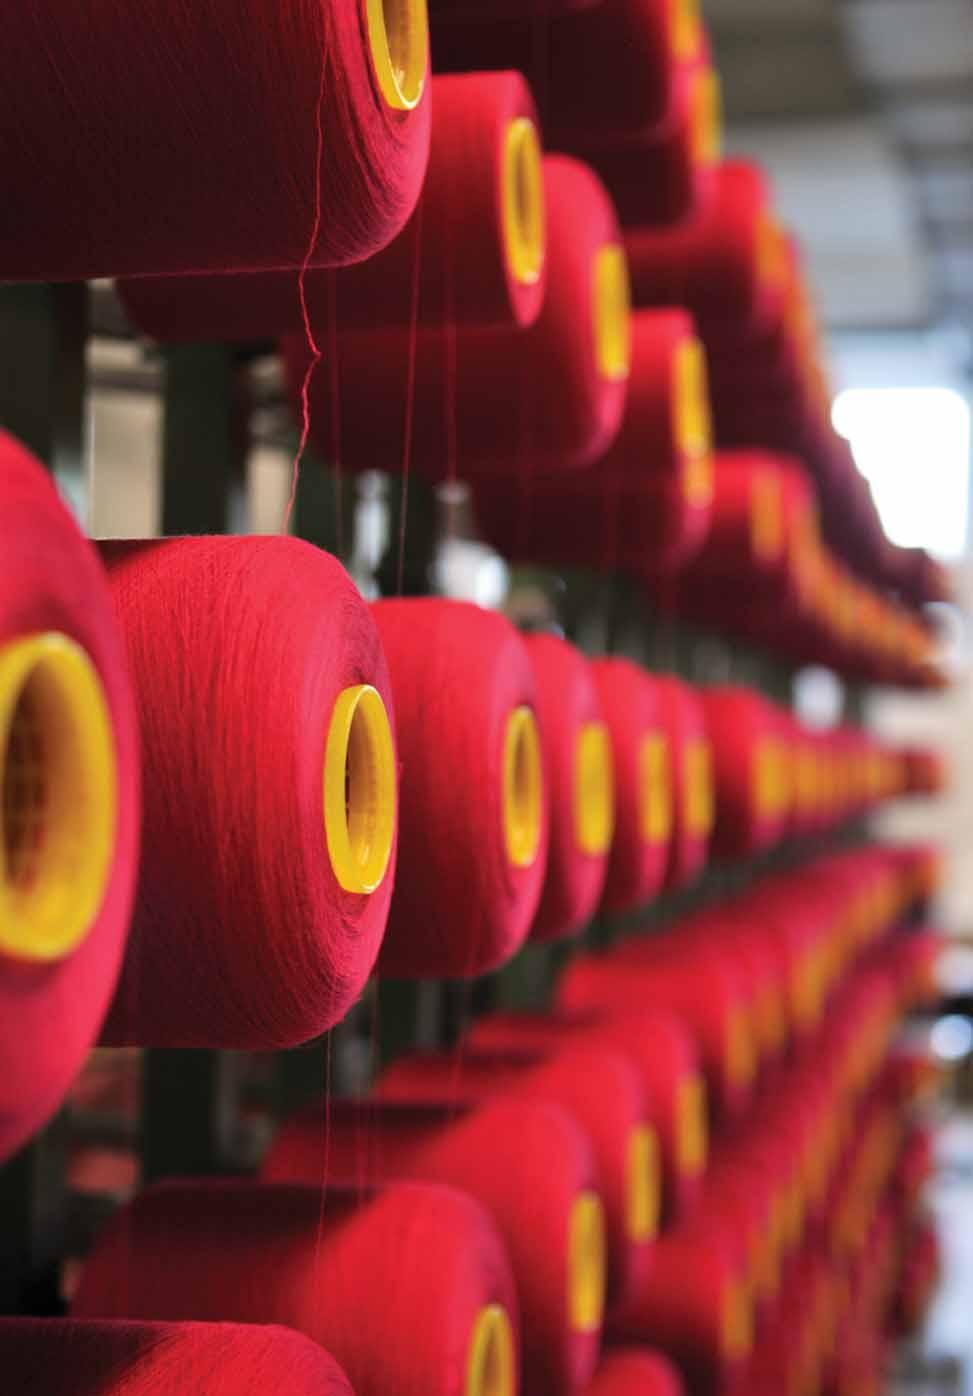 Indian Yarn & Fabric industry Optimistic about future growth The textile industry is the largest industry of modern India.